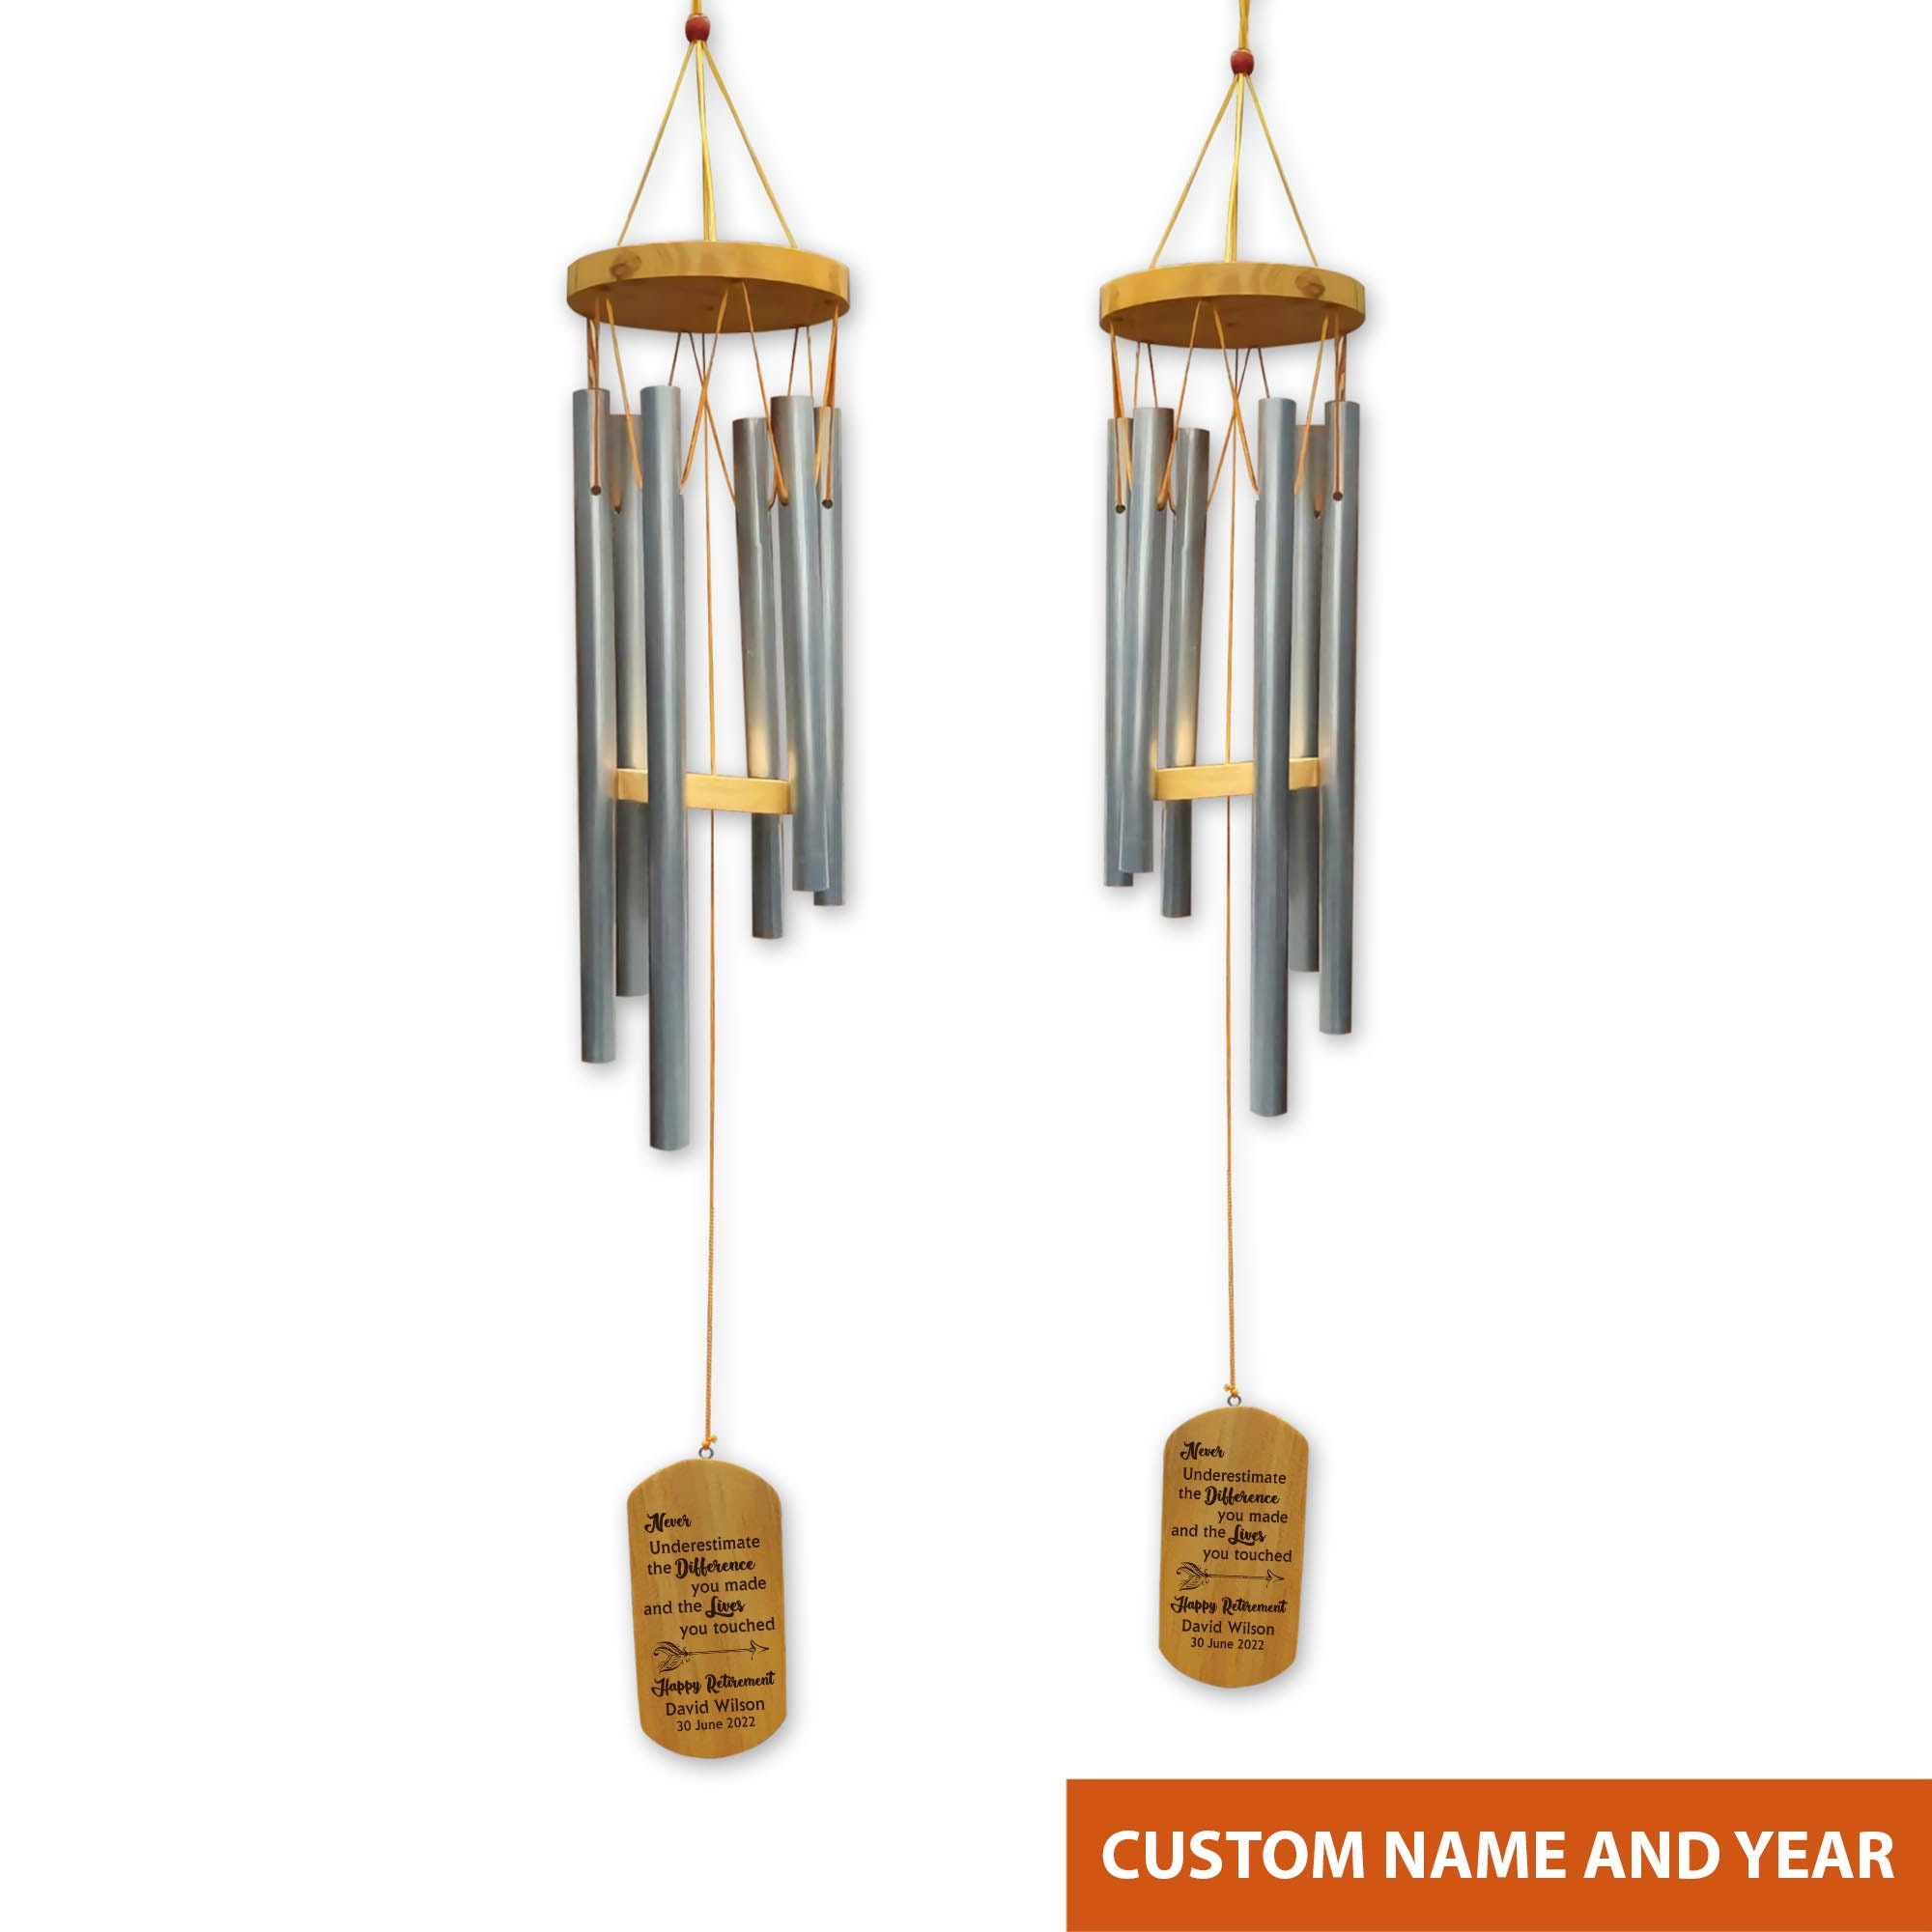 Personalized Happy Retirement Wind Chimes, Retirement Gifts